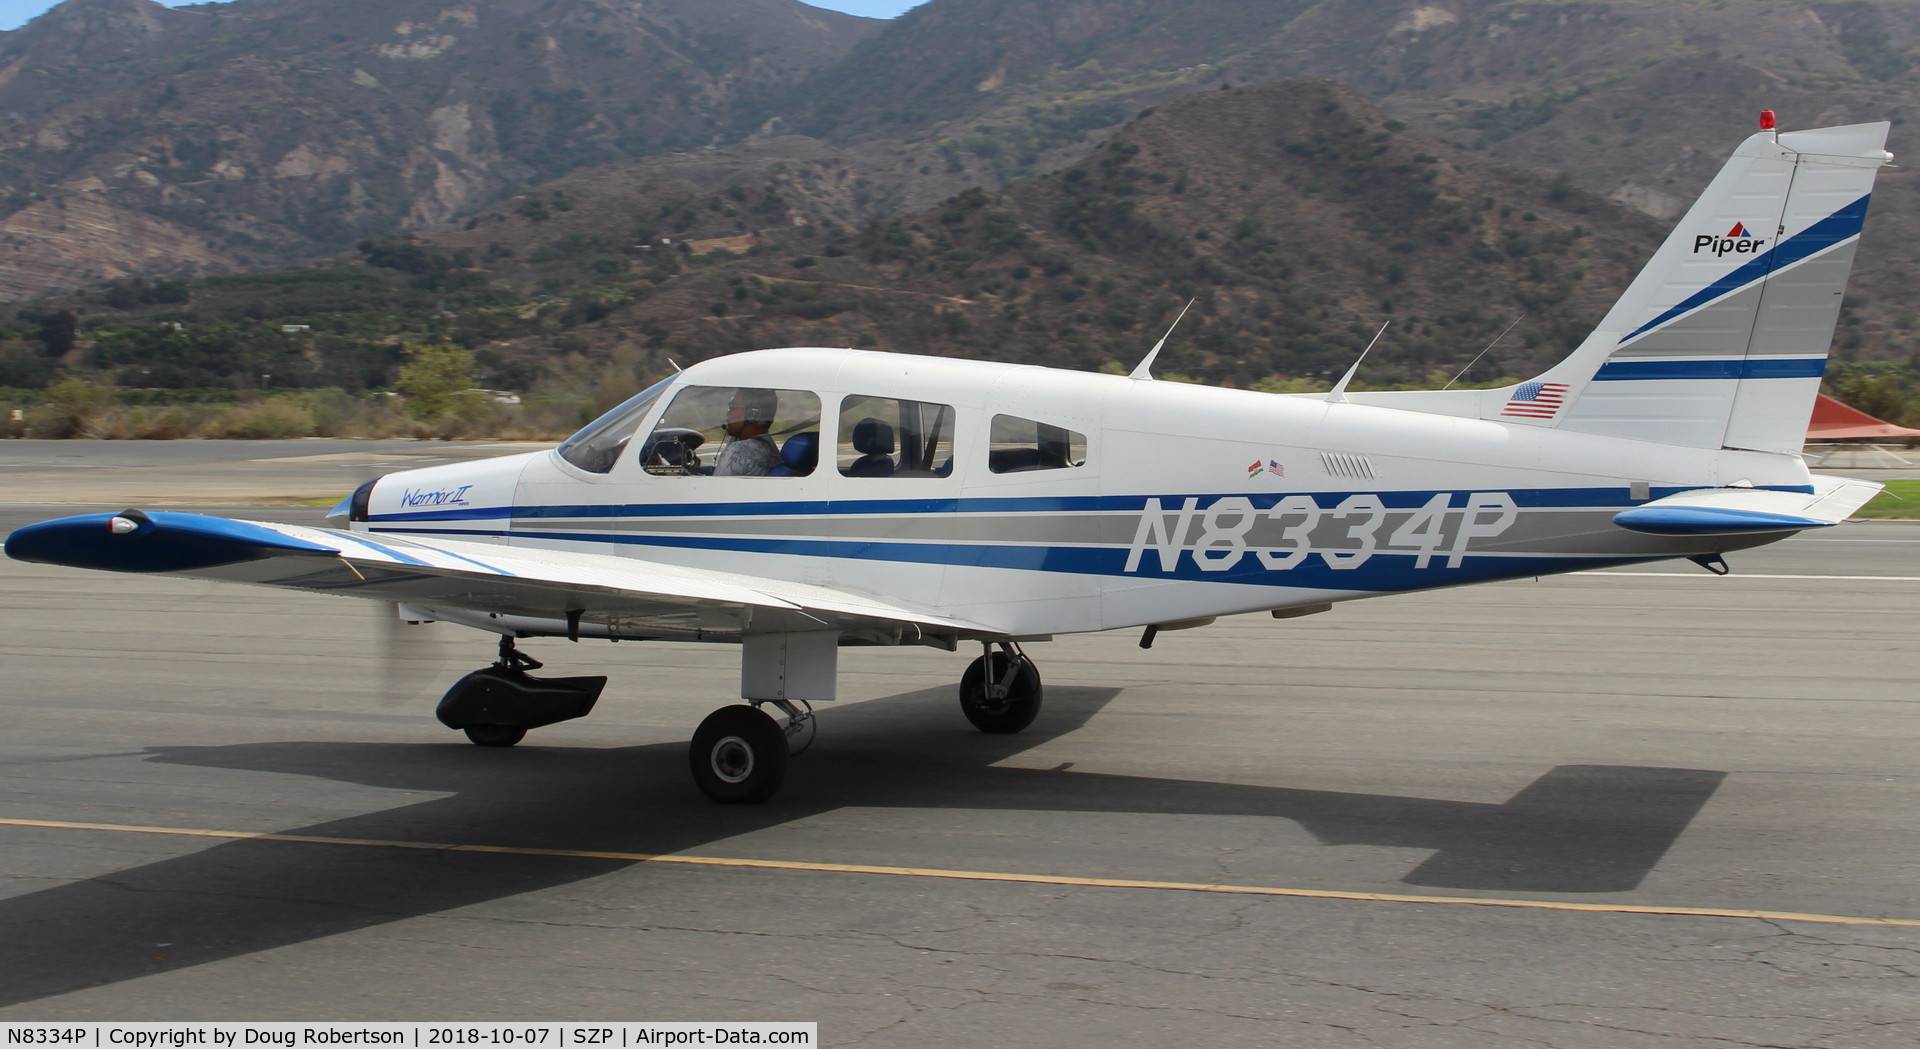 N8334P, 1981 Piper PA-28-161 C/N 28-8116149, 1981 Piper PA-28-161 WARRIOR II, Lycoming O-320-D3G 160 Hp, taxi back